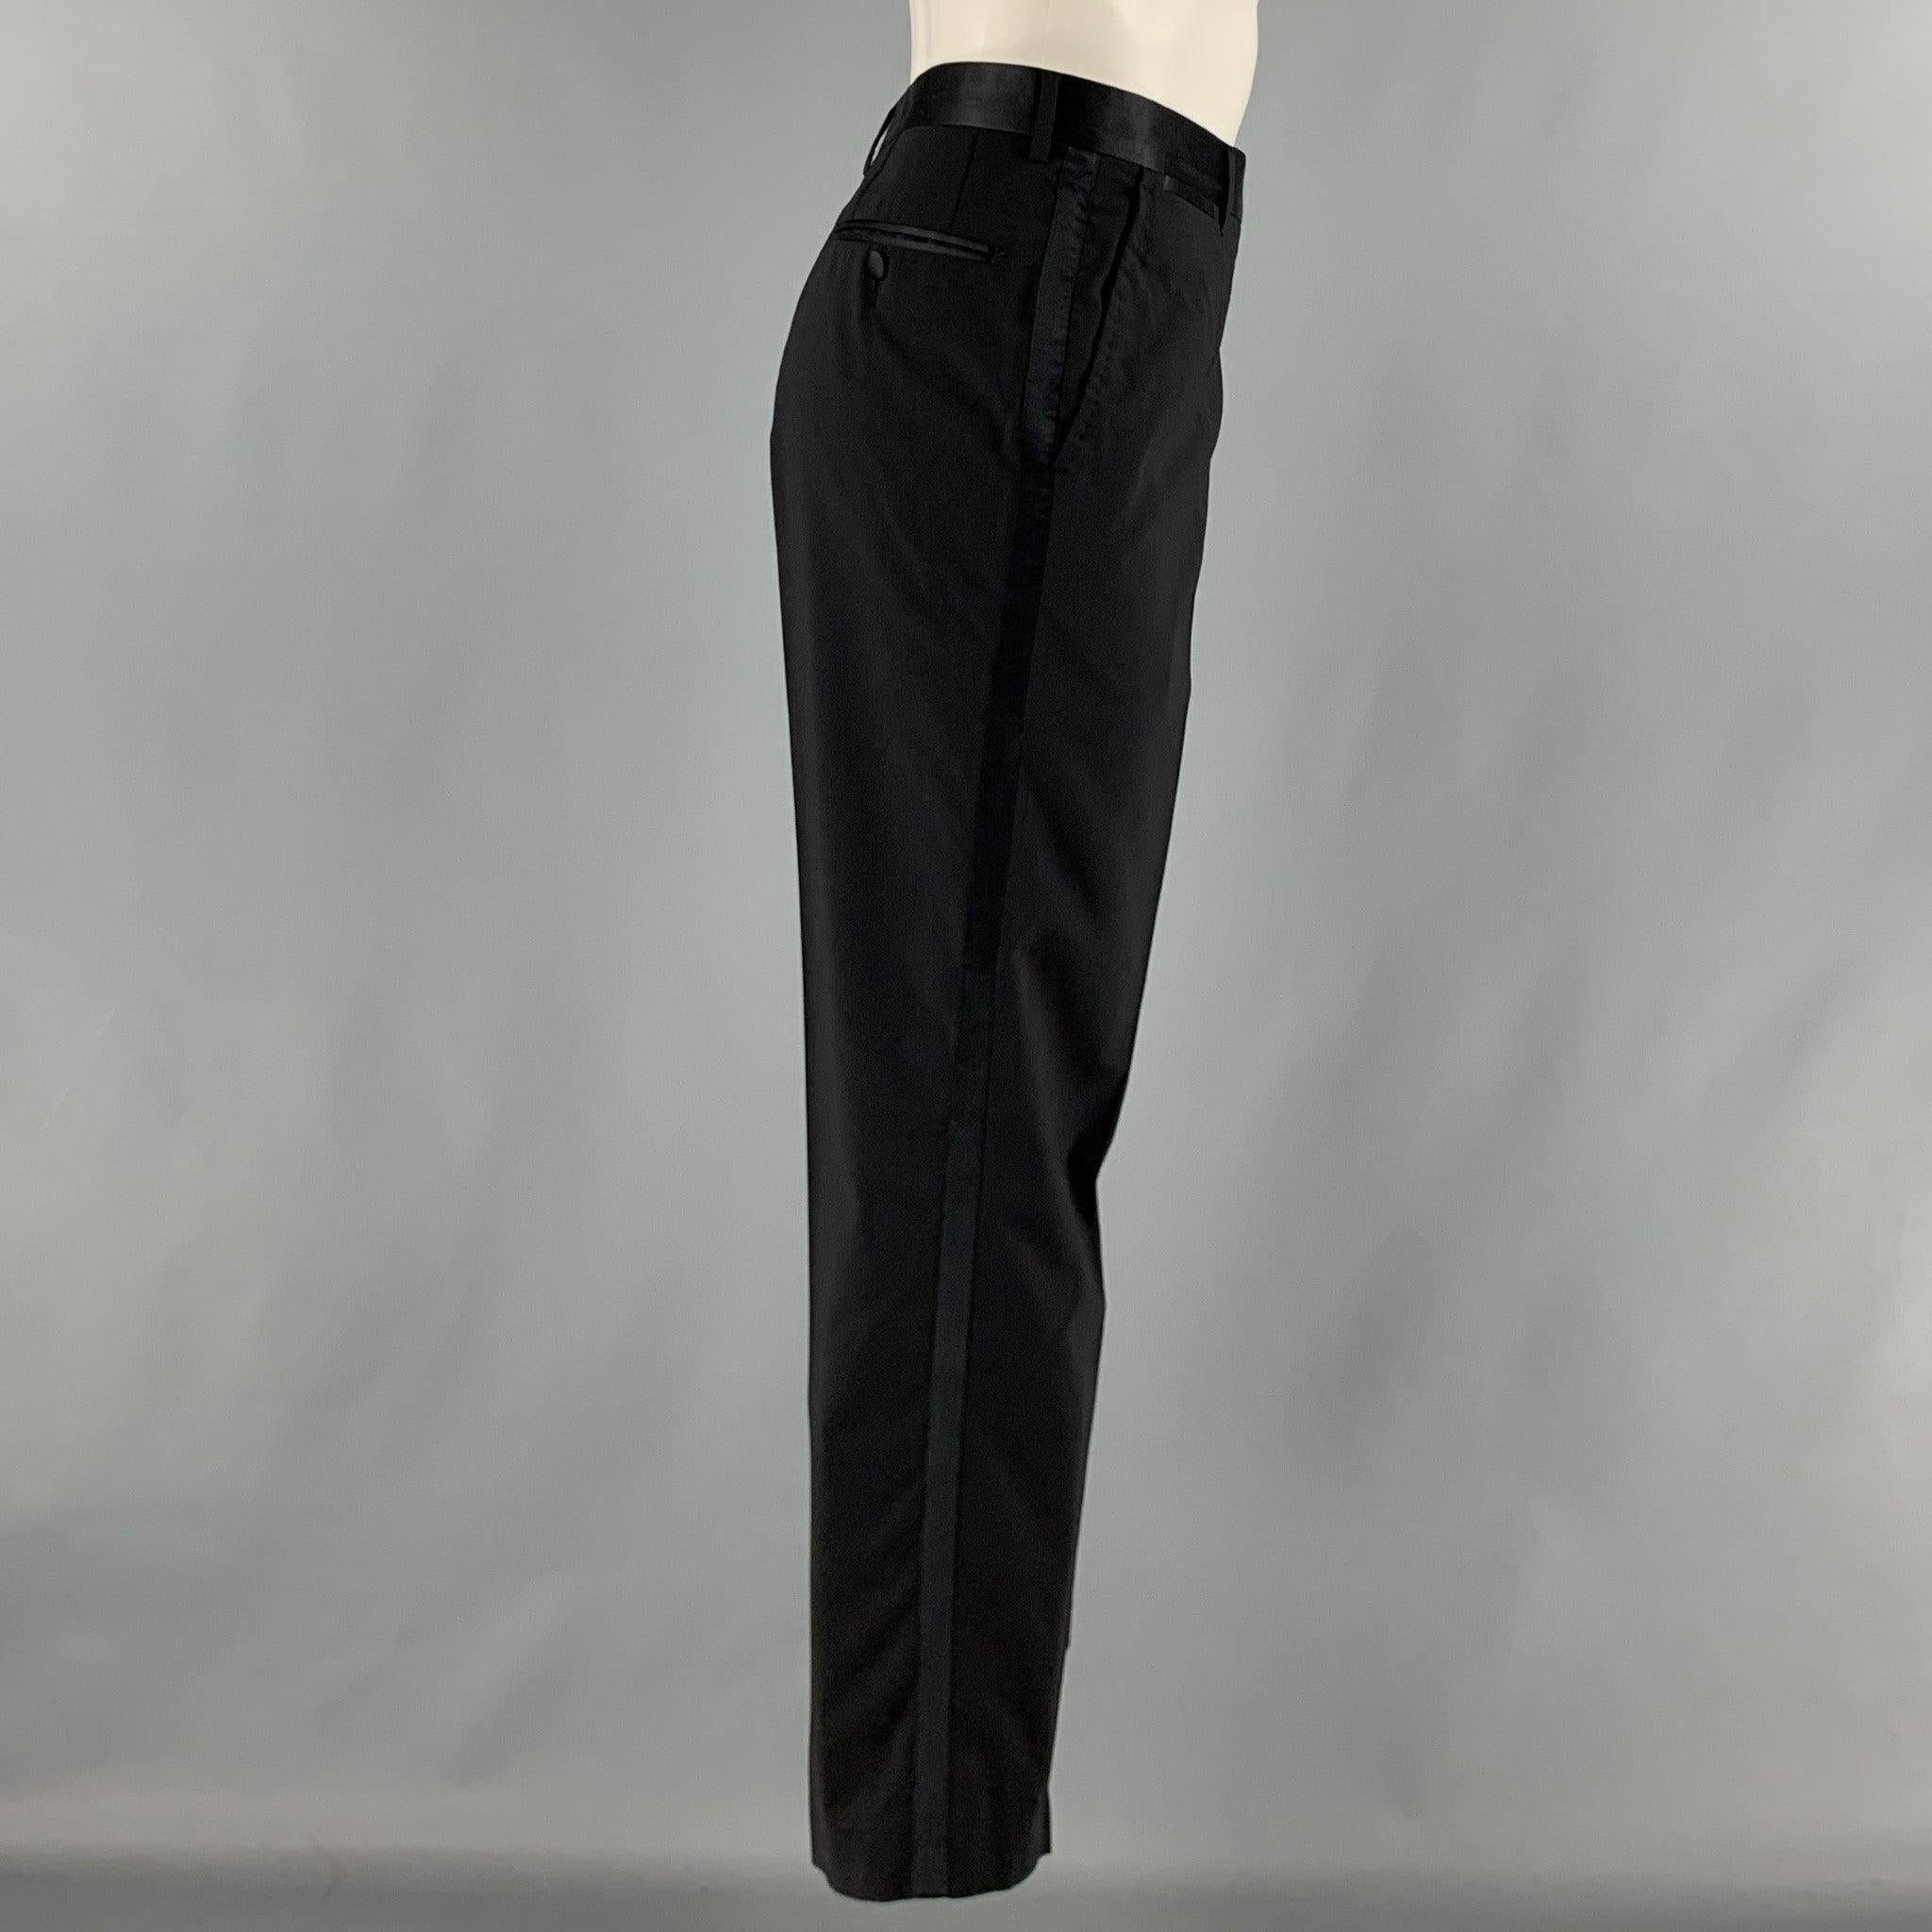 D&G by DOLCE & GABBANA Size 32 Black Solid Wool Blend Tuxedo Dress Pants In Excellent Condition For Sale In San Francisco, CA